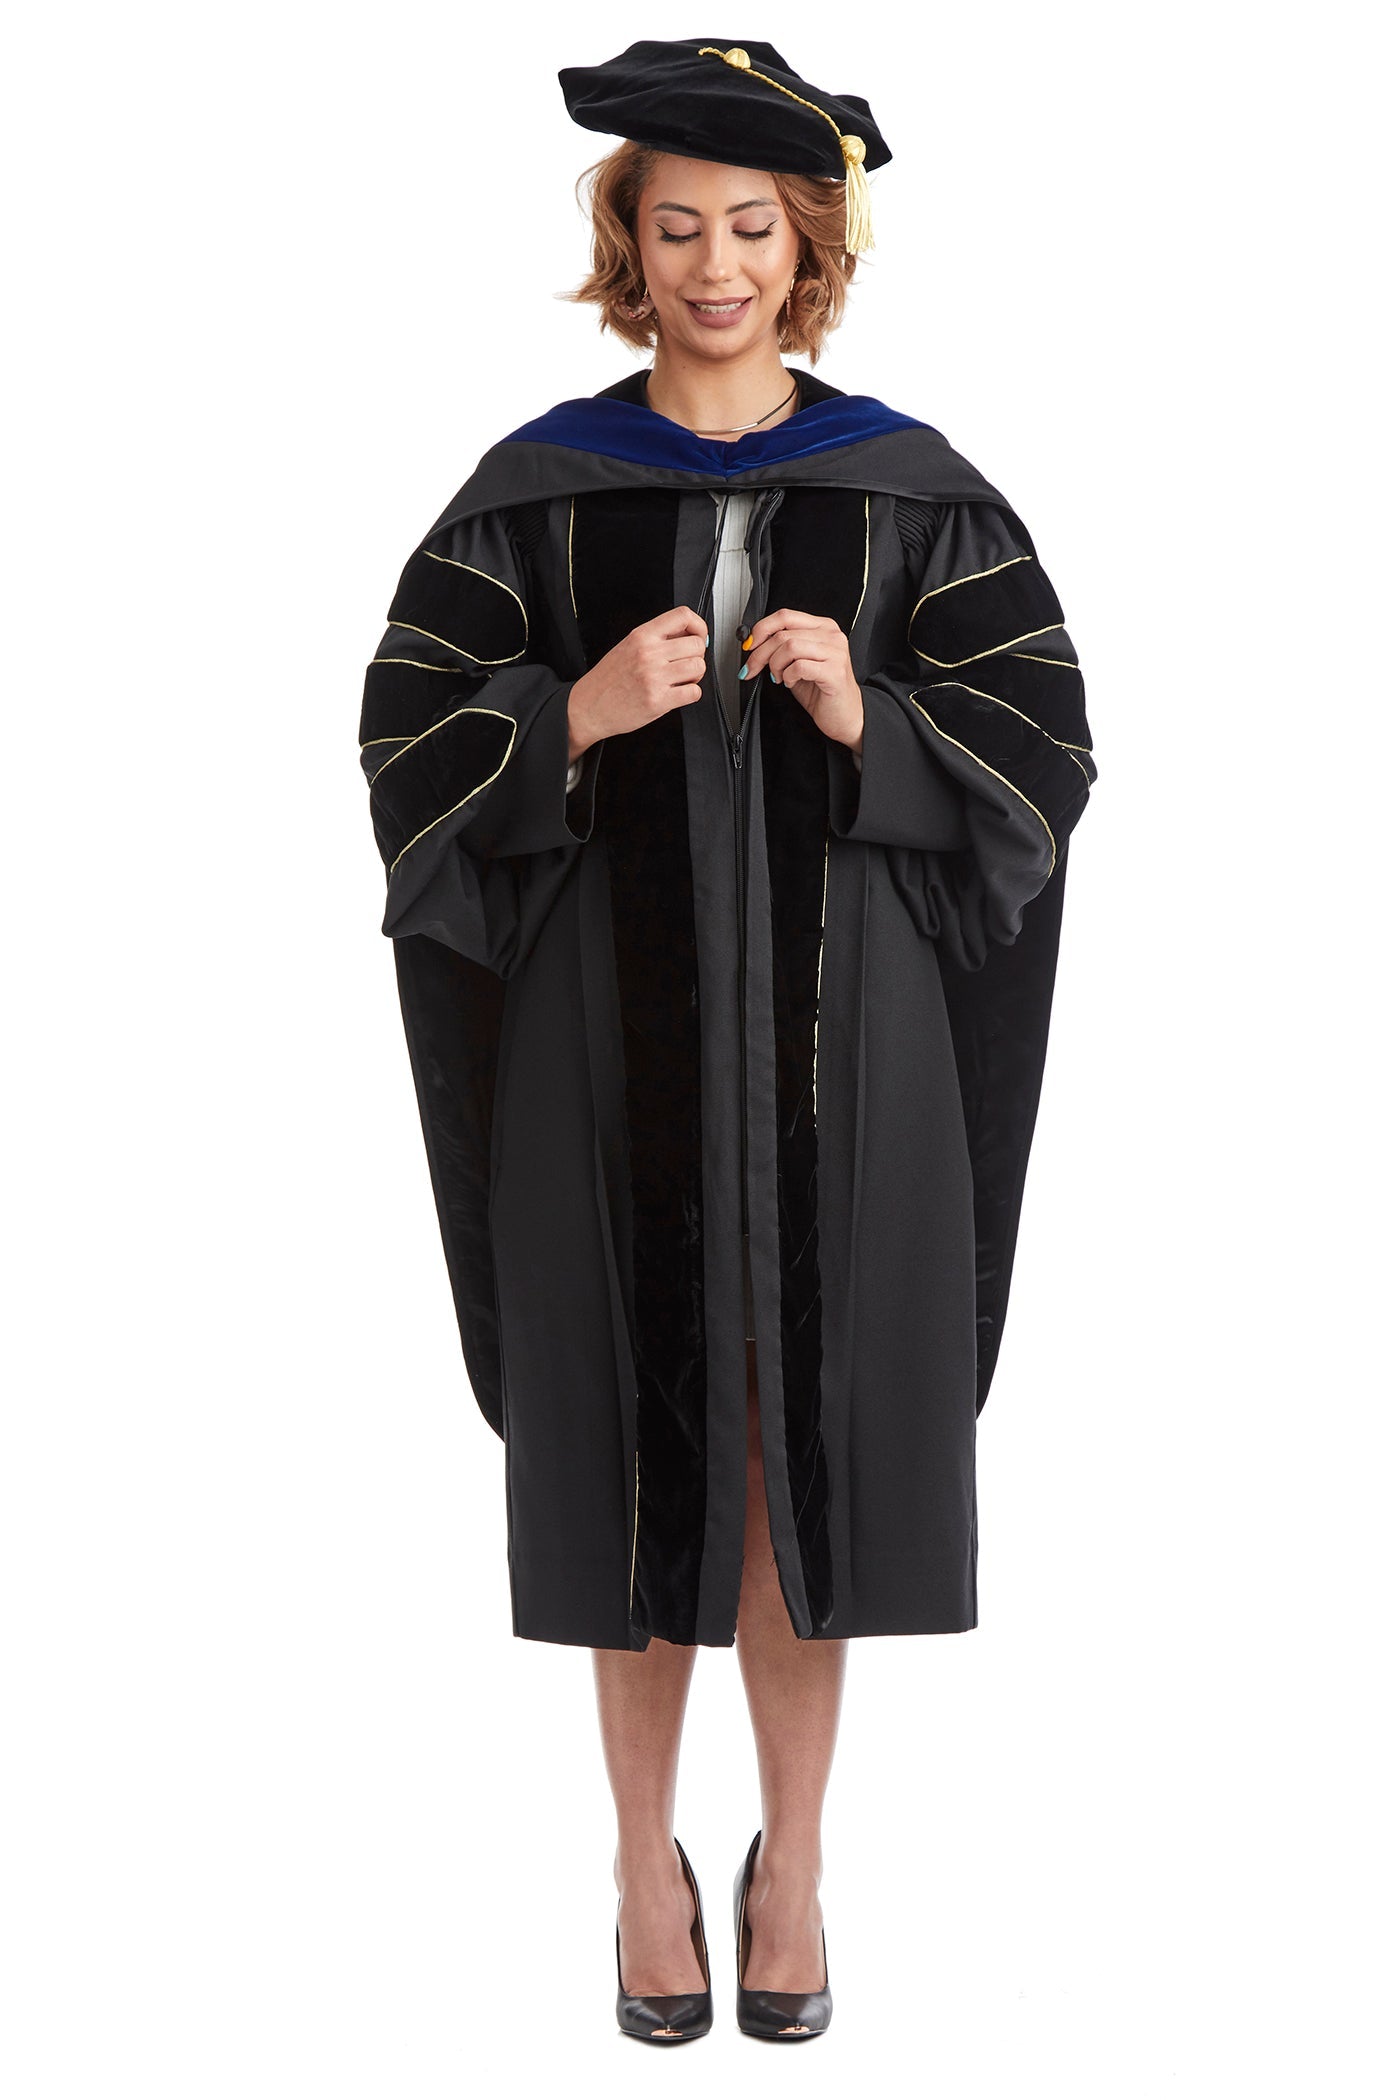 US Military Academy - West Point Doctoral Regalia Rental for Graduation